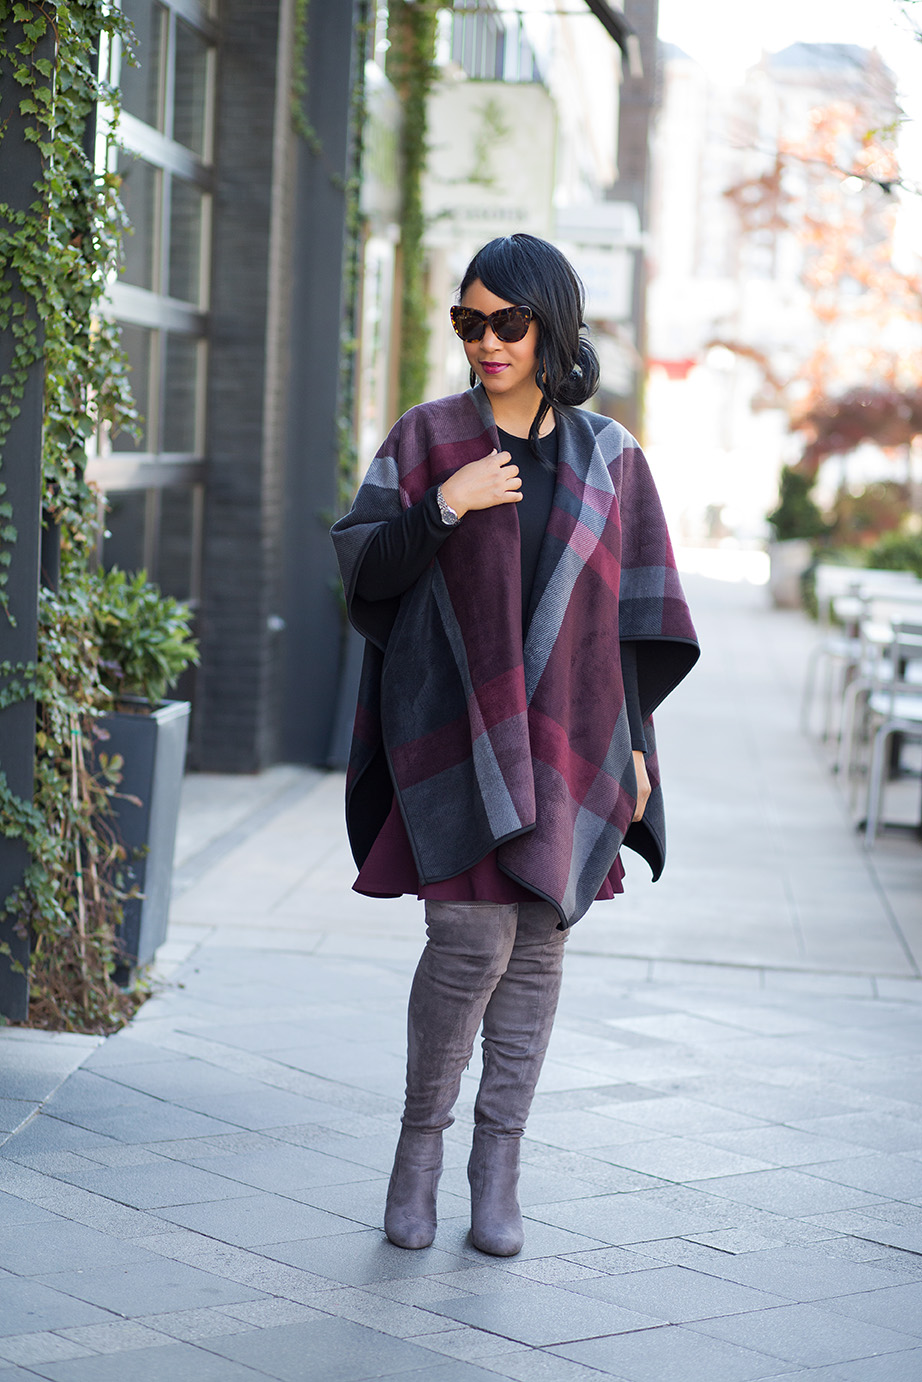 A case for Cold Weather capes: Costco wool print cape, Gap Long Sleeve Crew Tee, LOFT skirt, Grey Over the Knee Boots, House of Harlow Chelsea sunglasses, outfit of the day